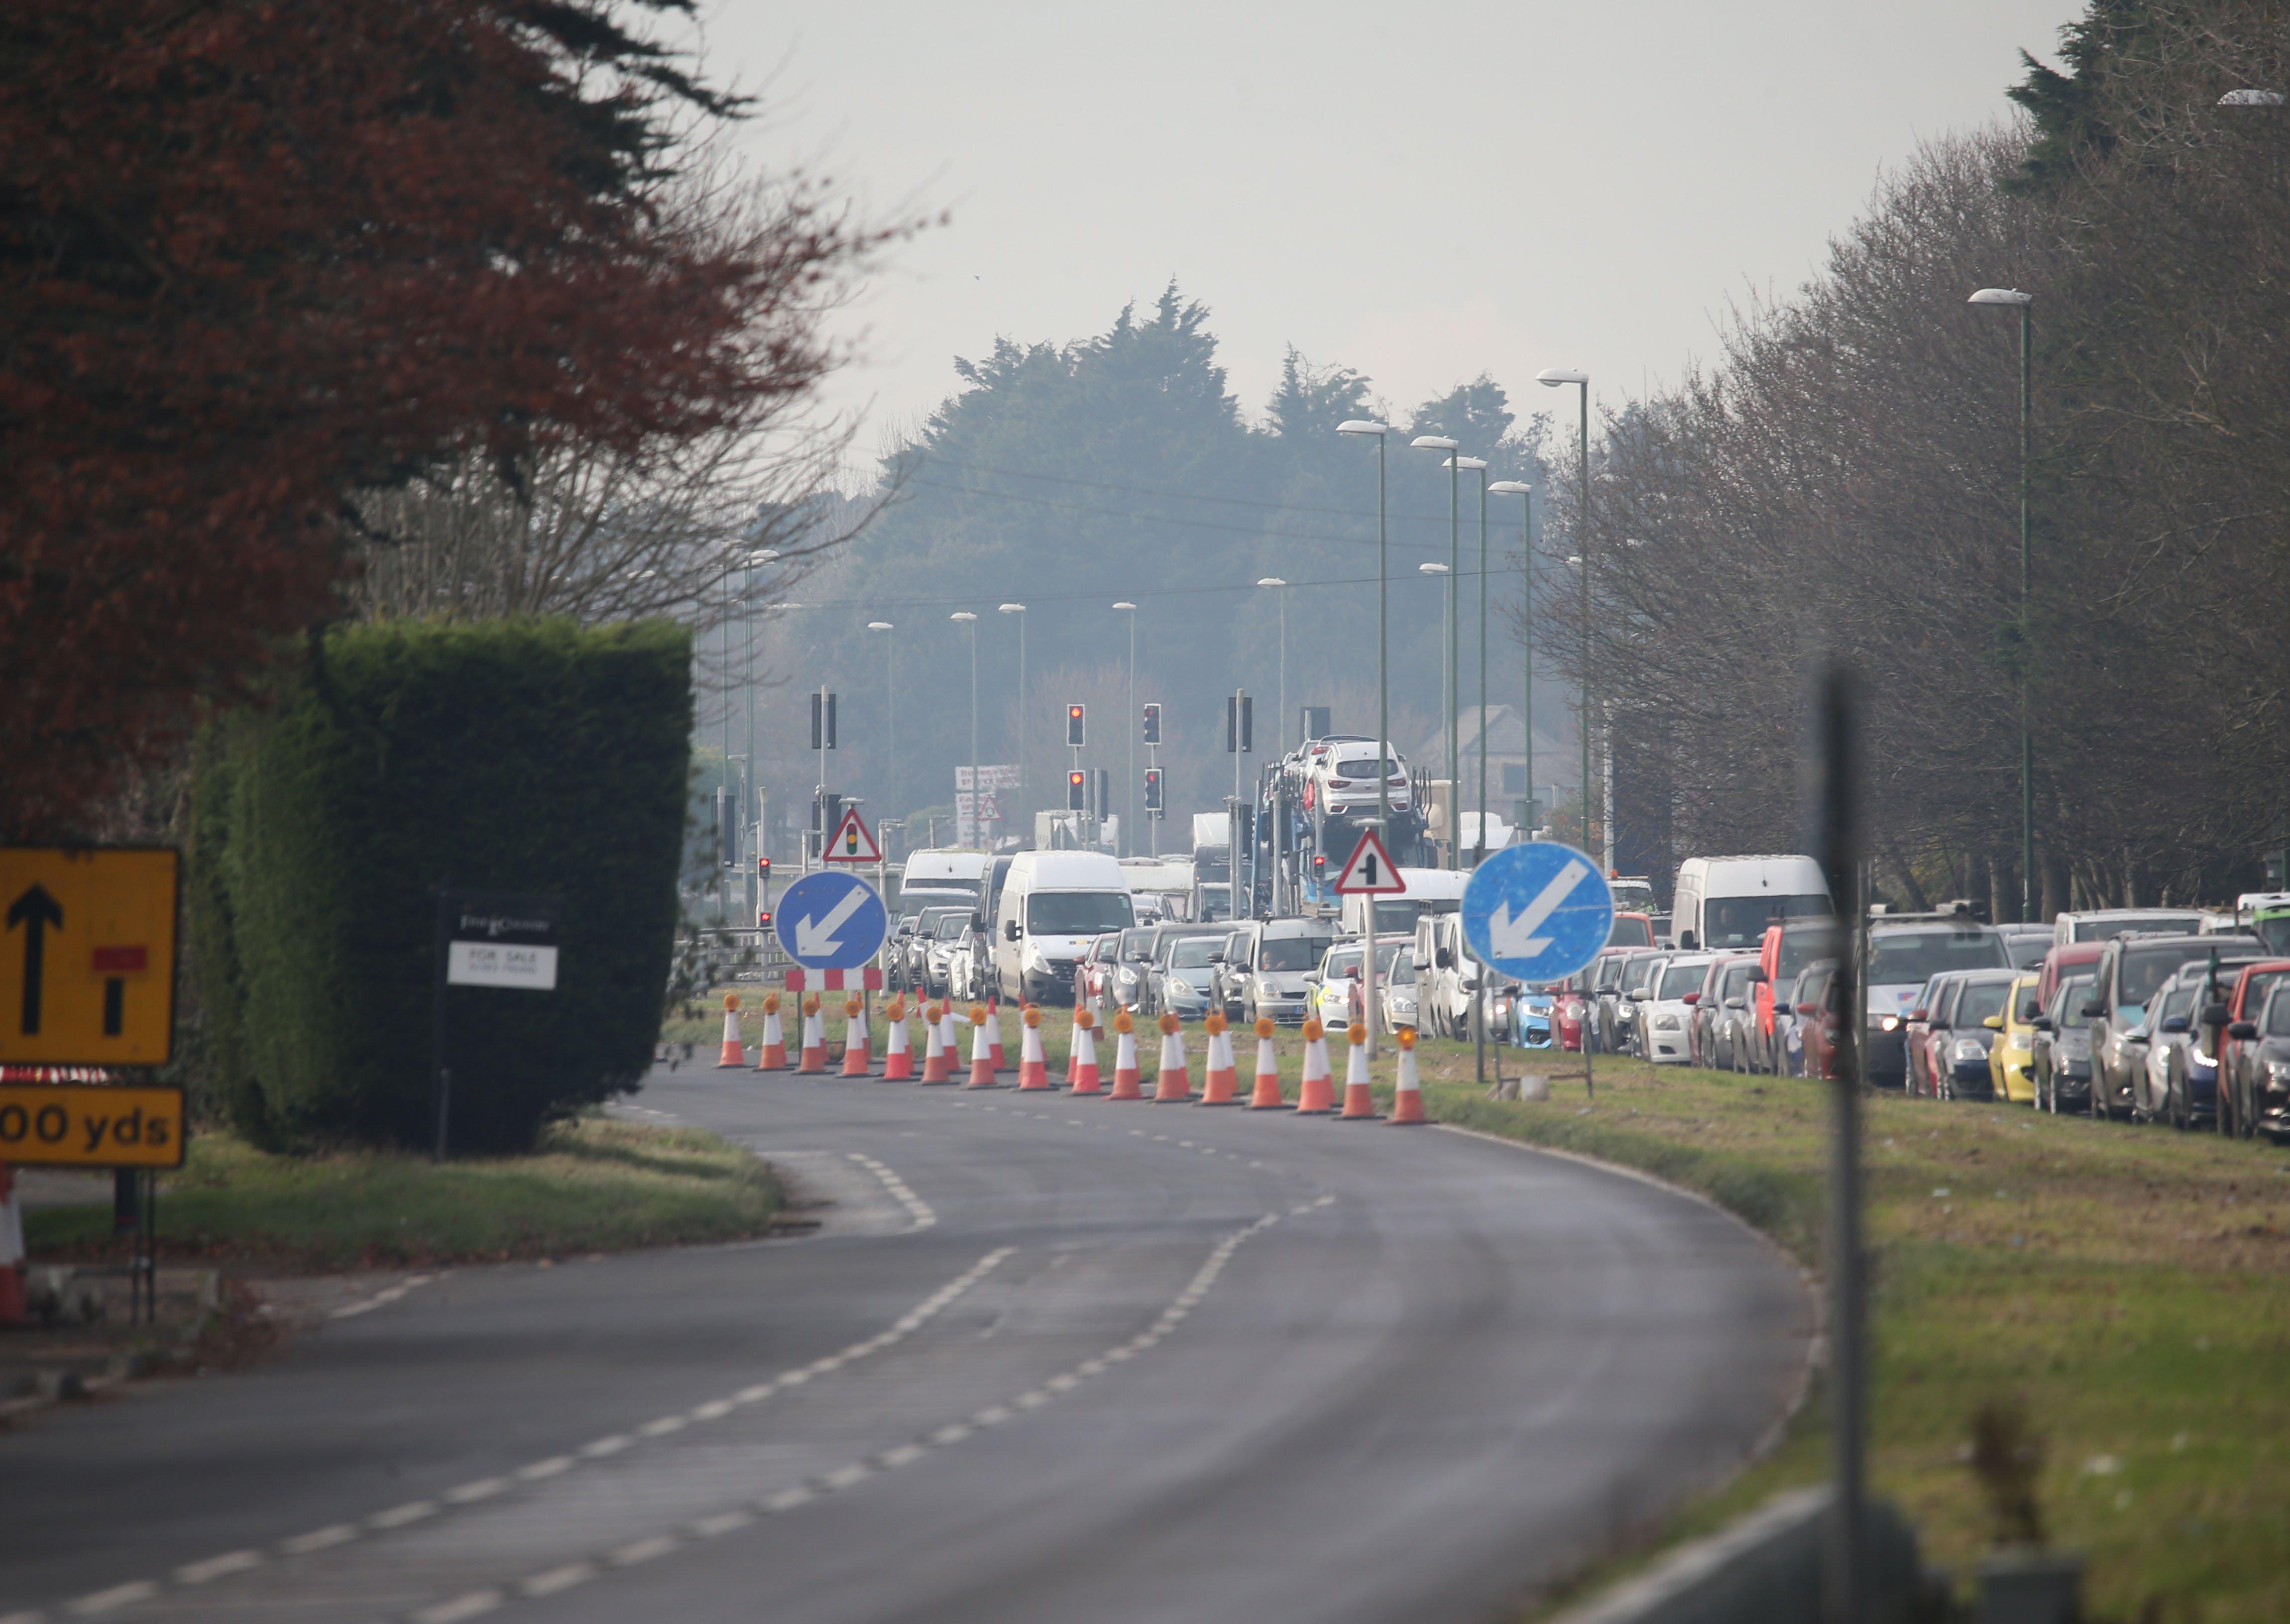 The road has been closed due to a gas leak